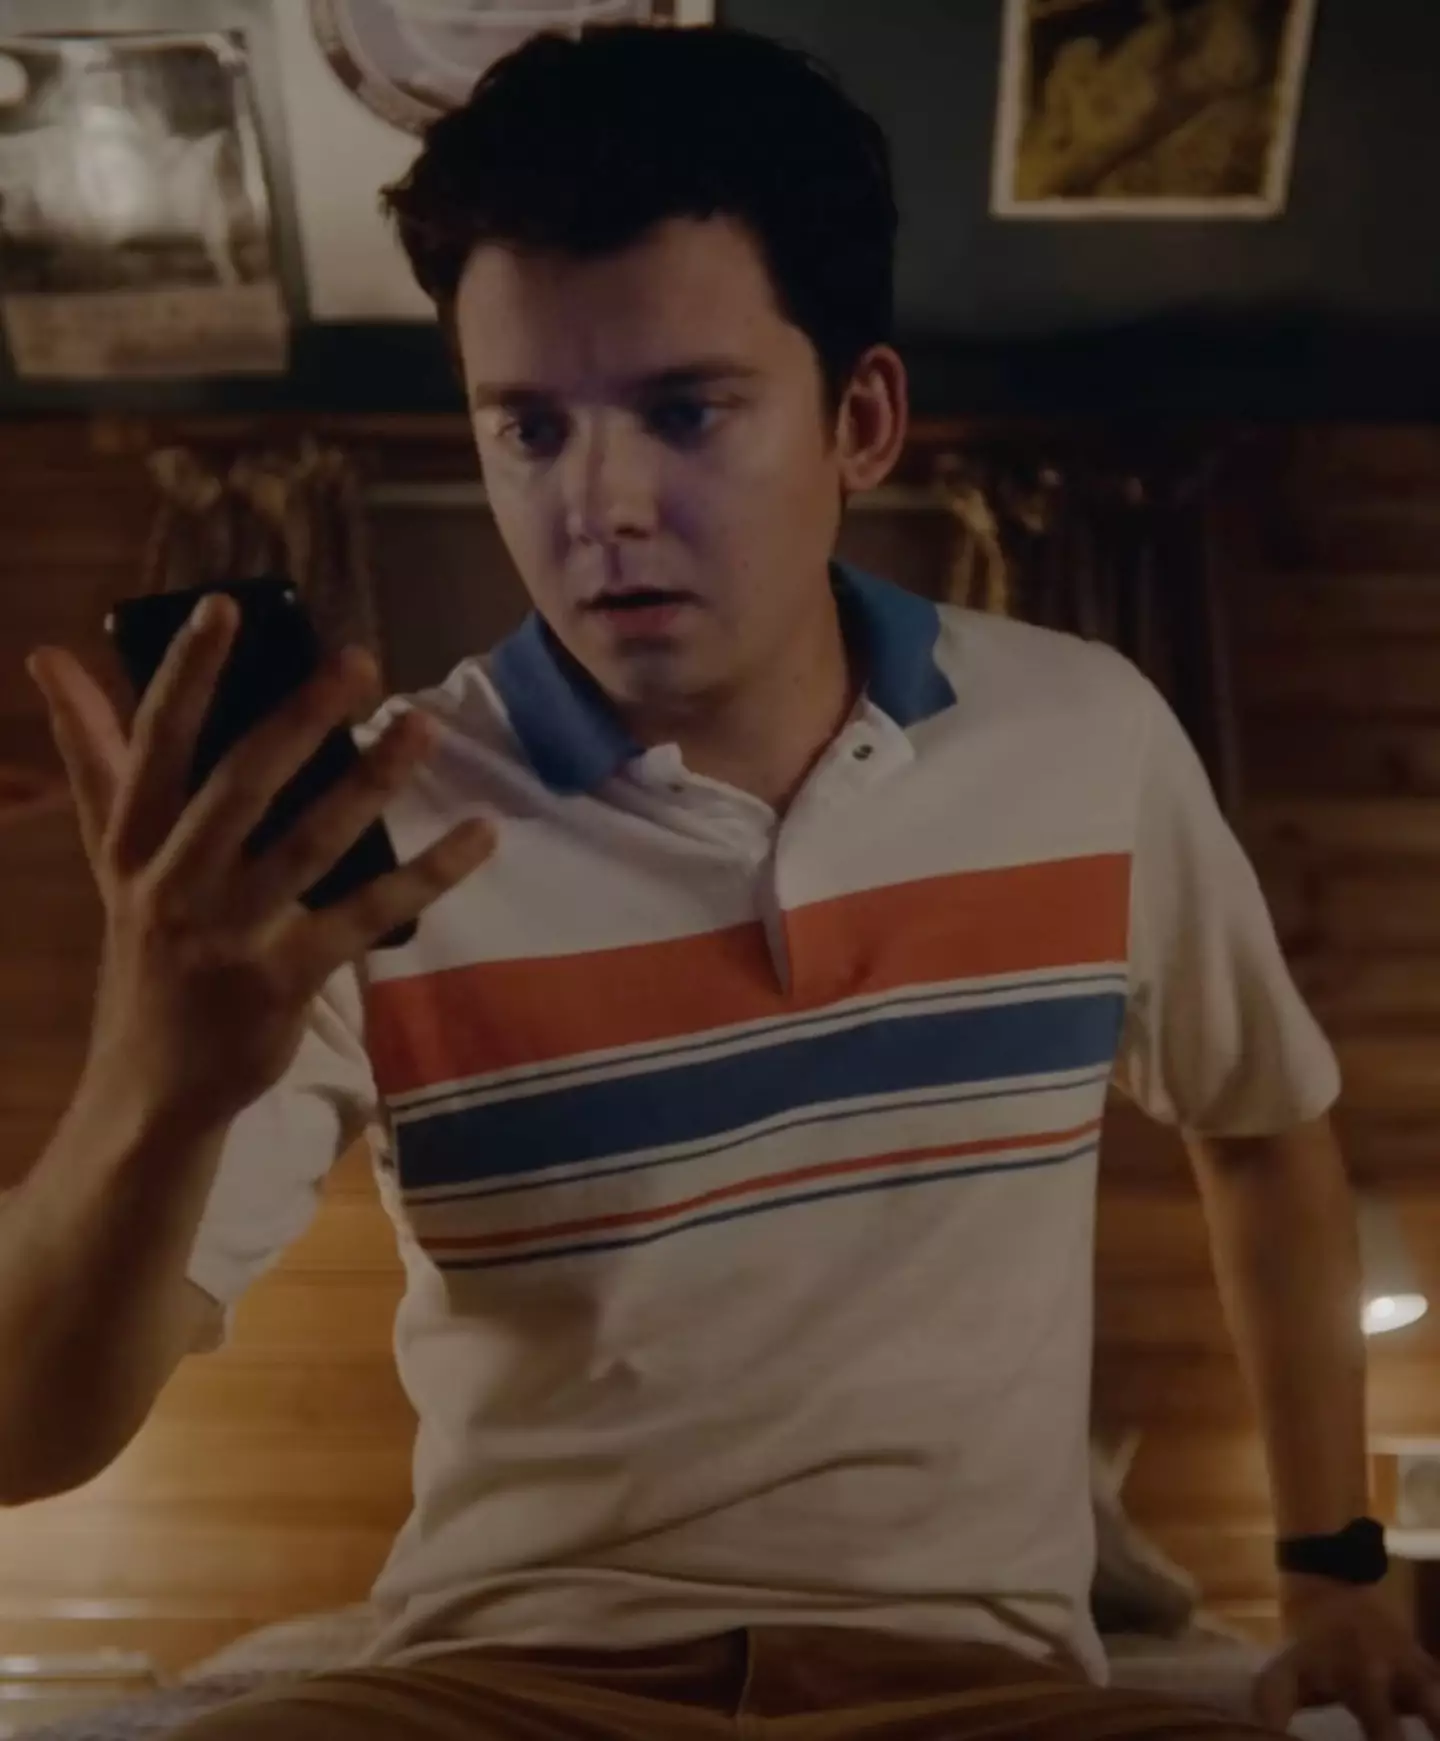 Fans have been left stunned after learning Asa Butterfield's full name.